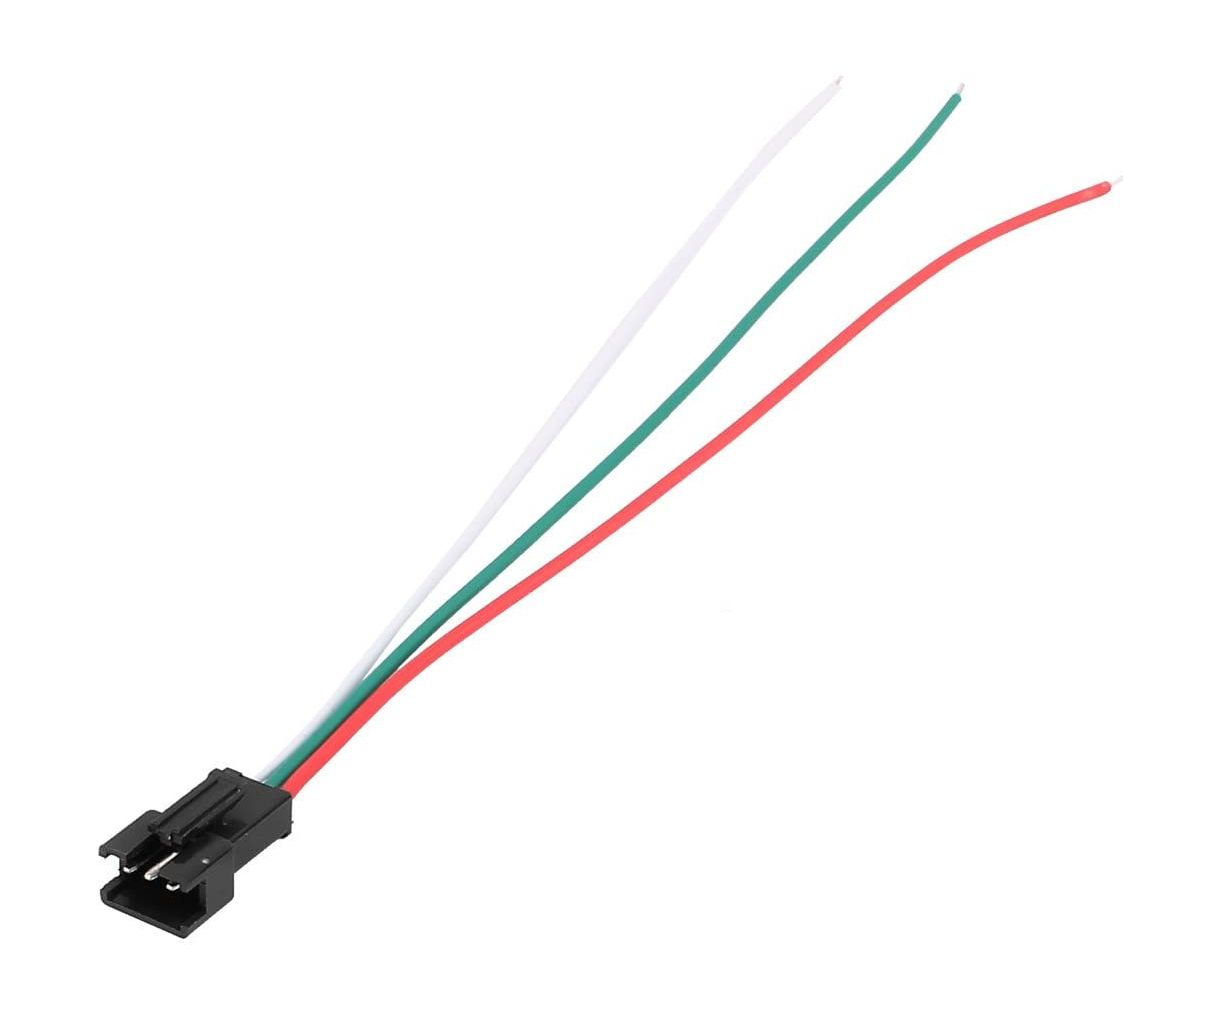 Connector JST-SM 2.54mm pitch 3-pin male met 15cm kabel 22AWG max. 2.5A